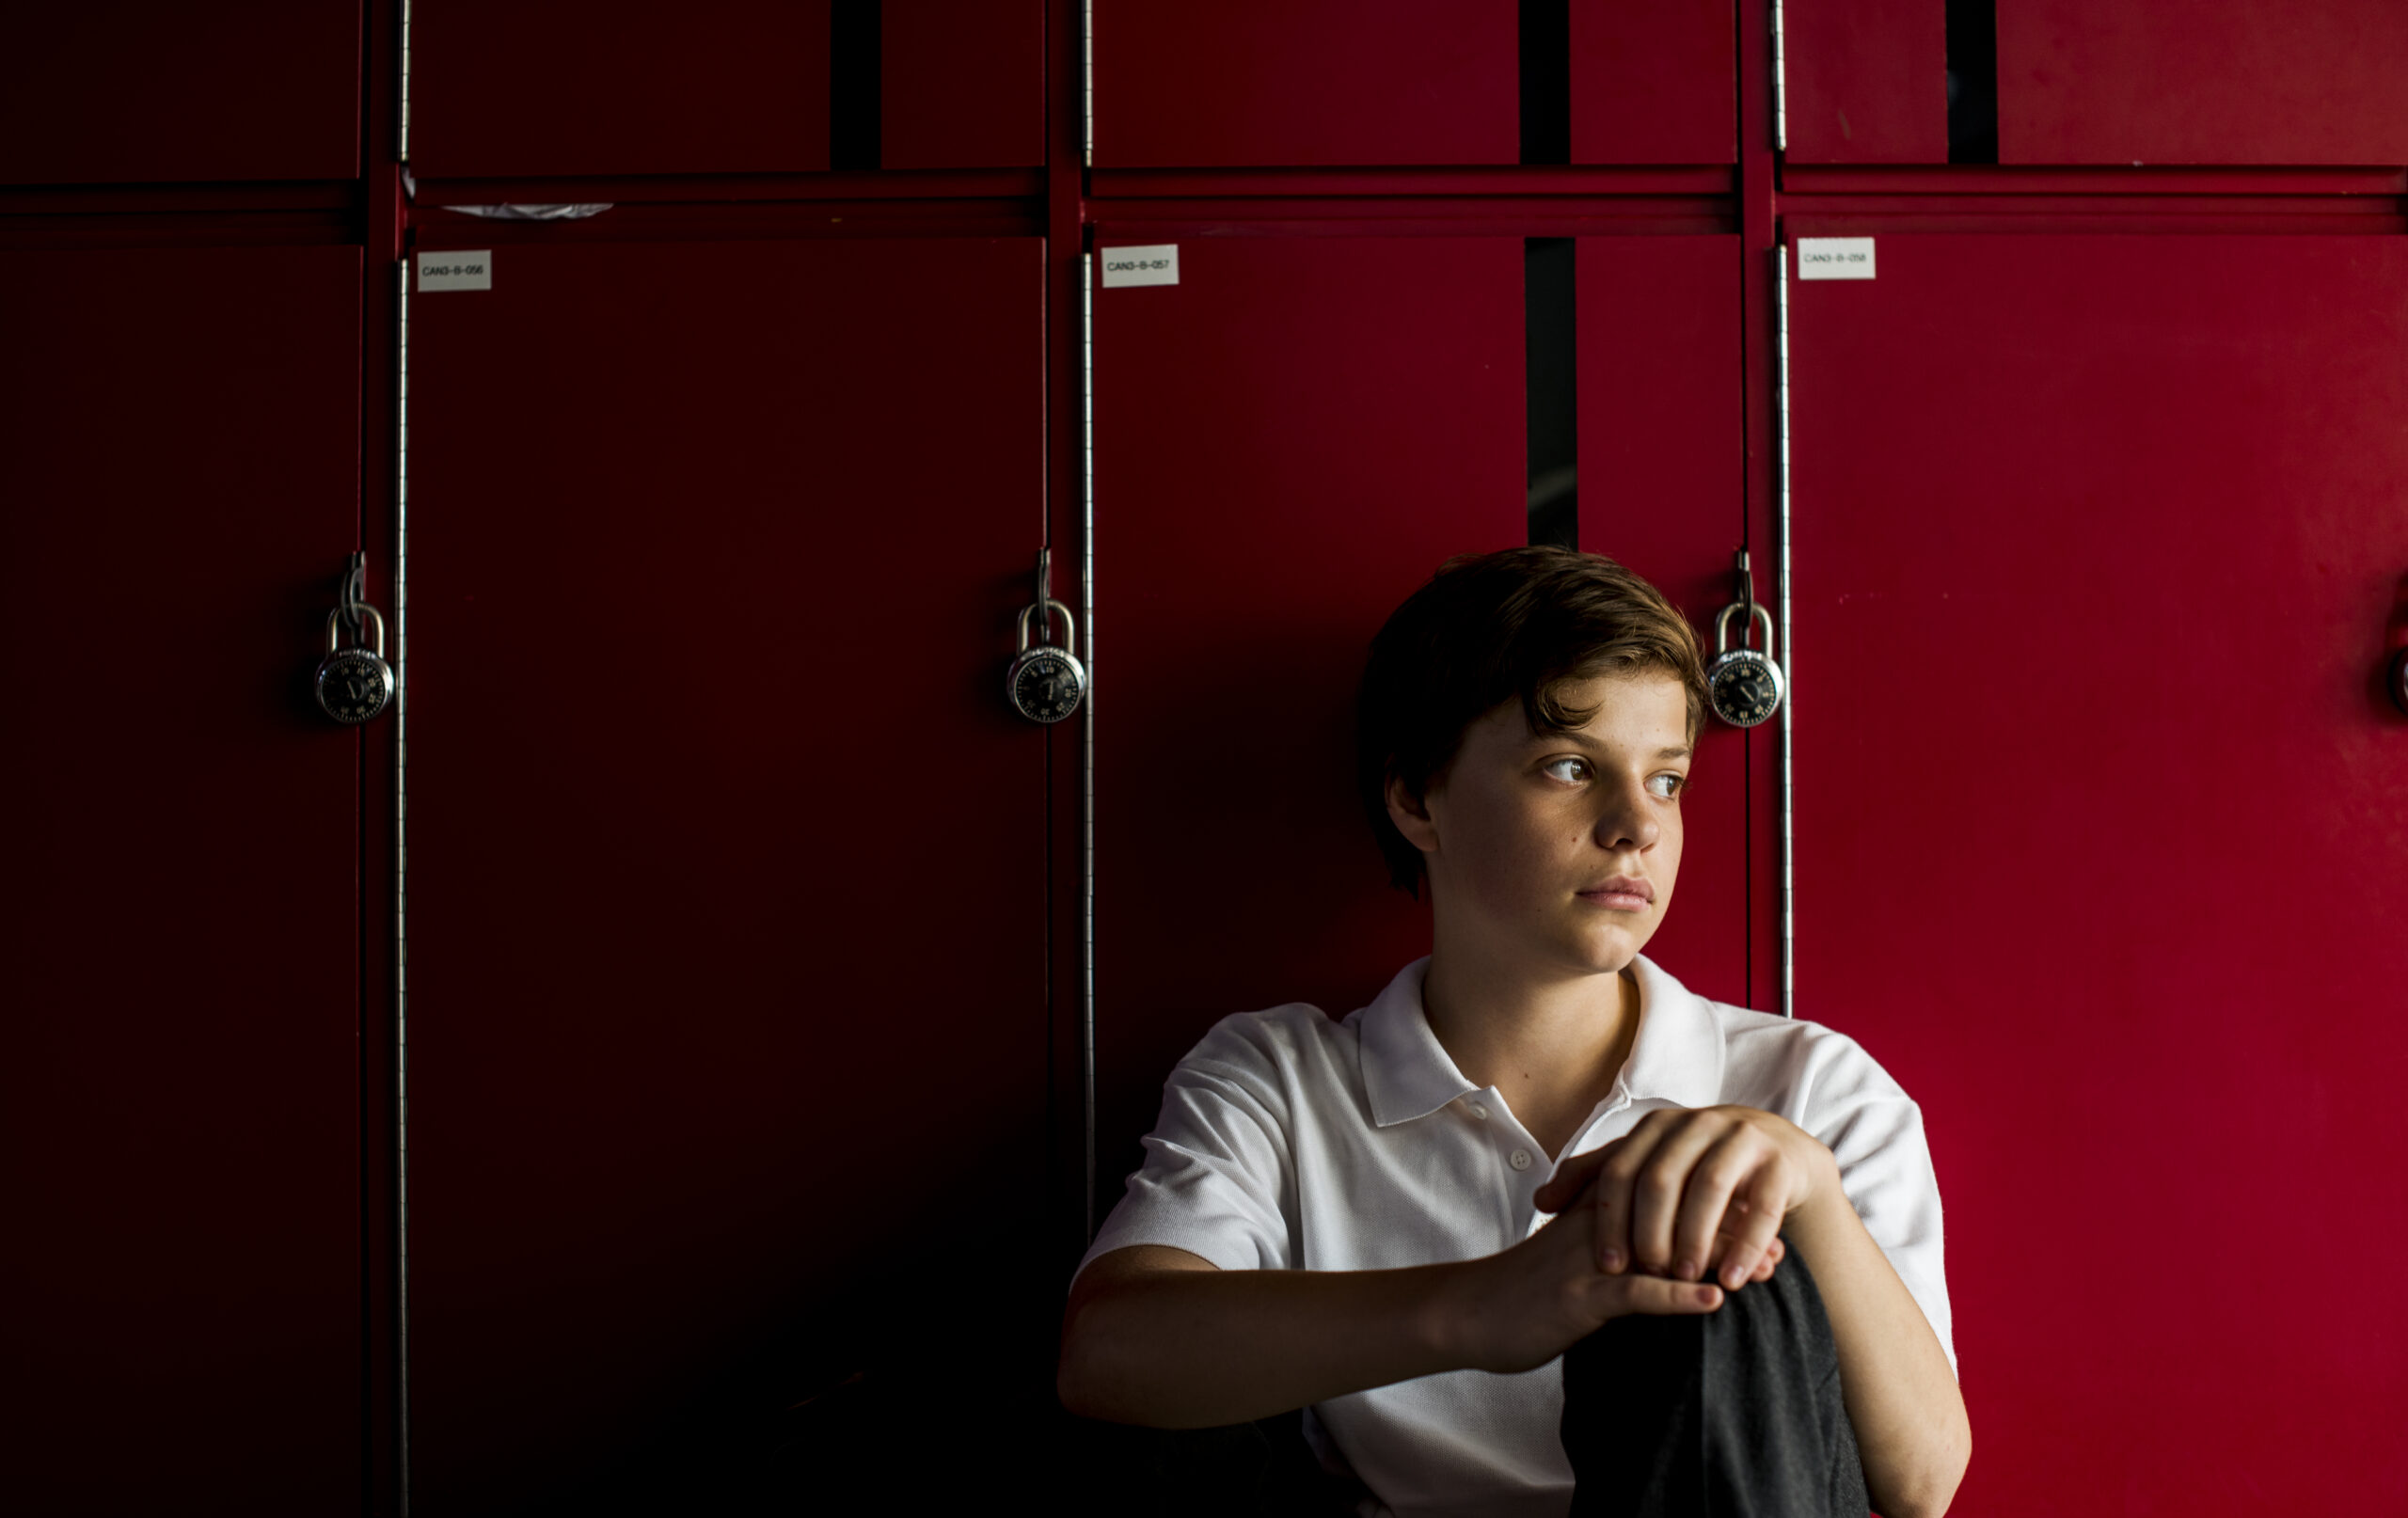 Student sitting in-front of lockers sadly